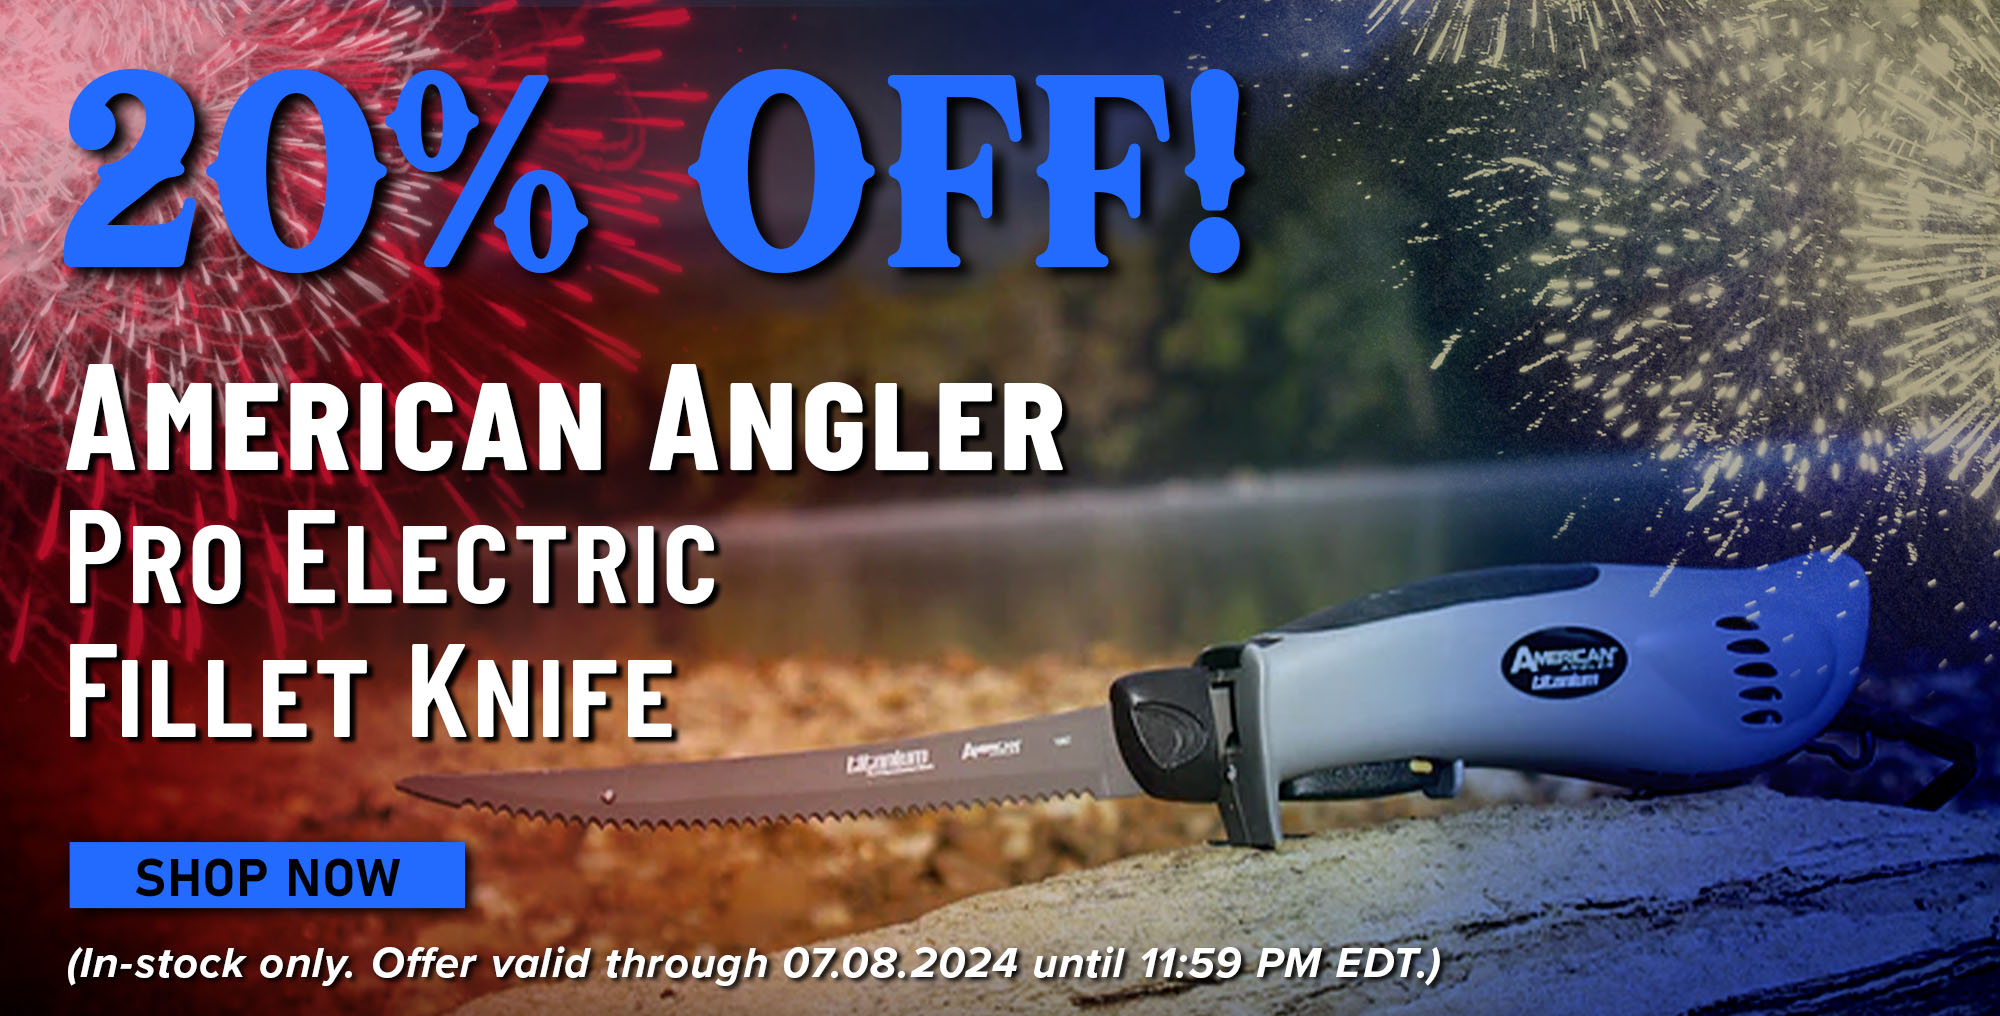 20% Off! American Angler Pro Electric Fillet Knife Shop Now (In-stock only. Offer valid through 07.08.2024 until 11:59 PM EDT.)